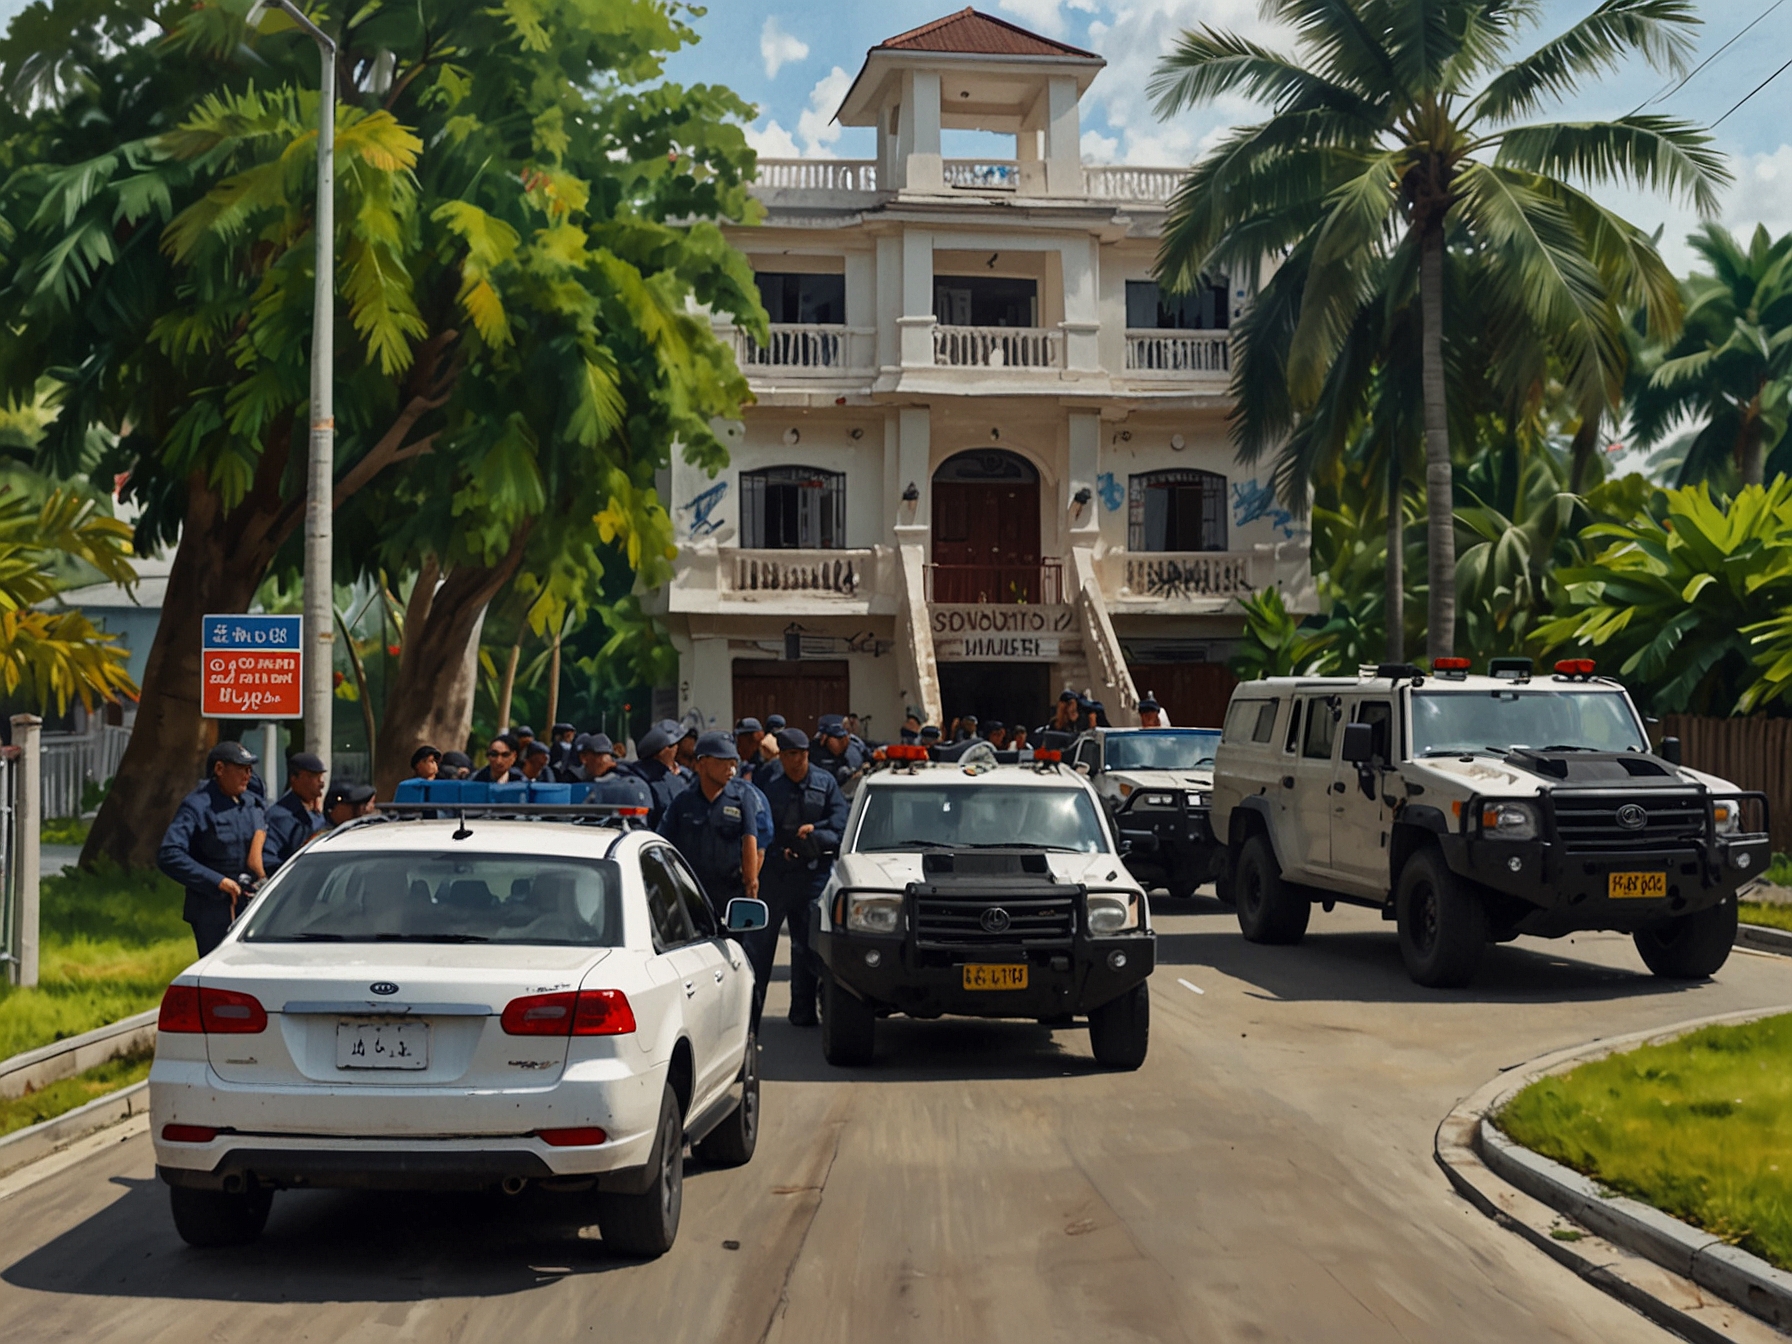 Heavily armed officers and armored vehicles surround the property of controversial religious leader Apollo Quiboloy during a high-profile raid by the PNP and CIDG.